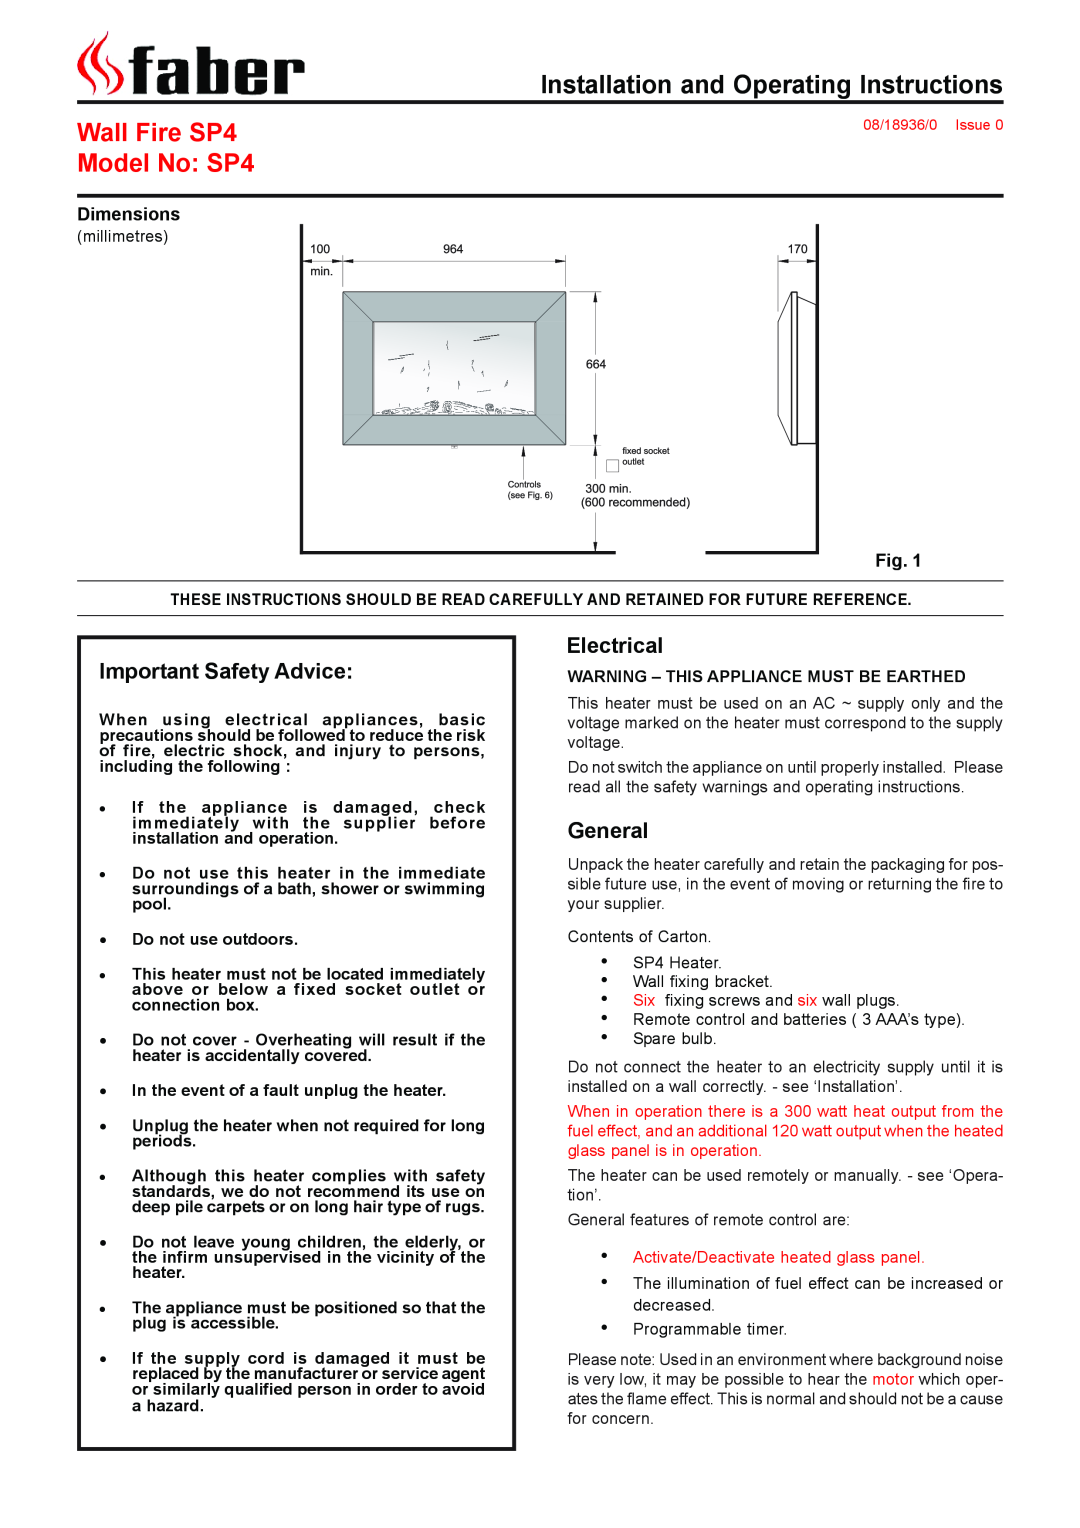 Faber SP4 dimensions Important Safety Advice, Electrical, General, Dimensions, Do not use outdoors 